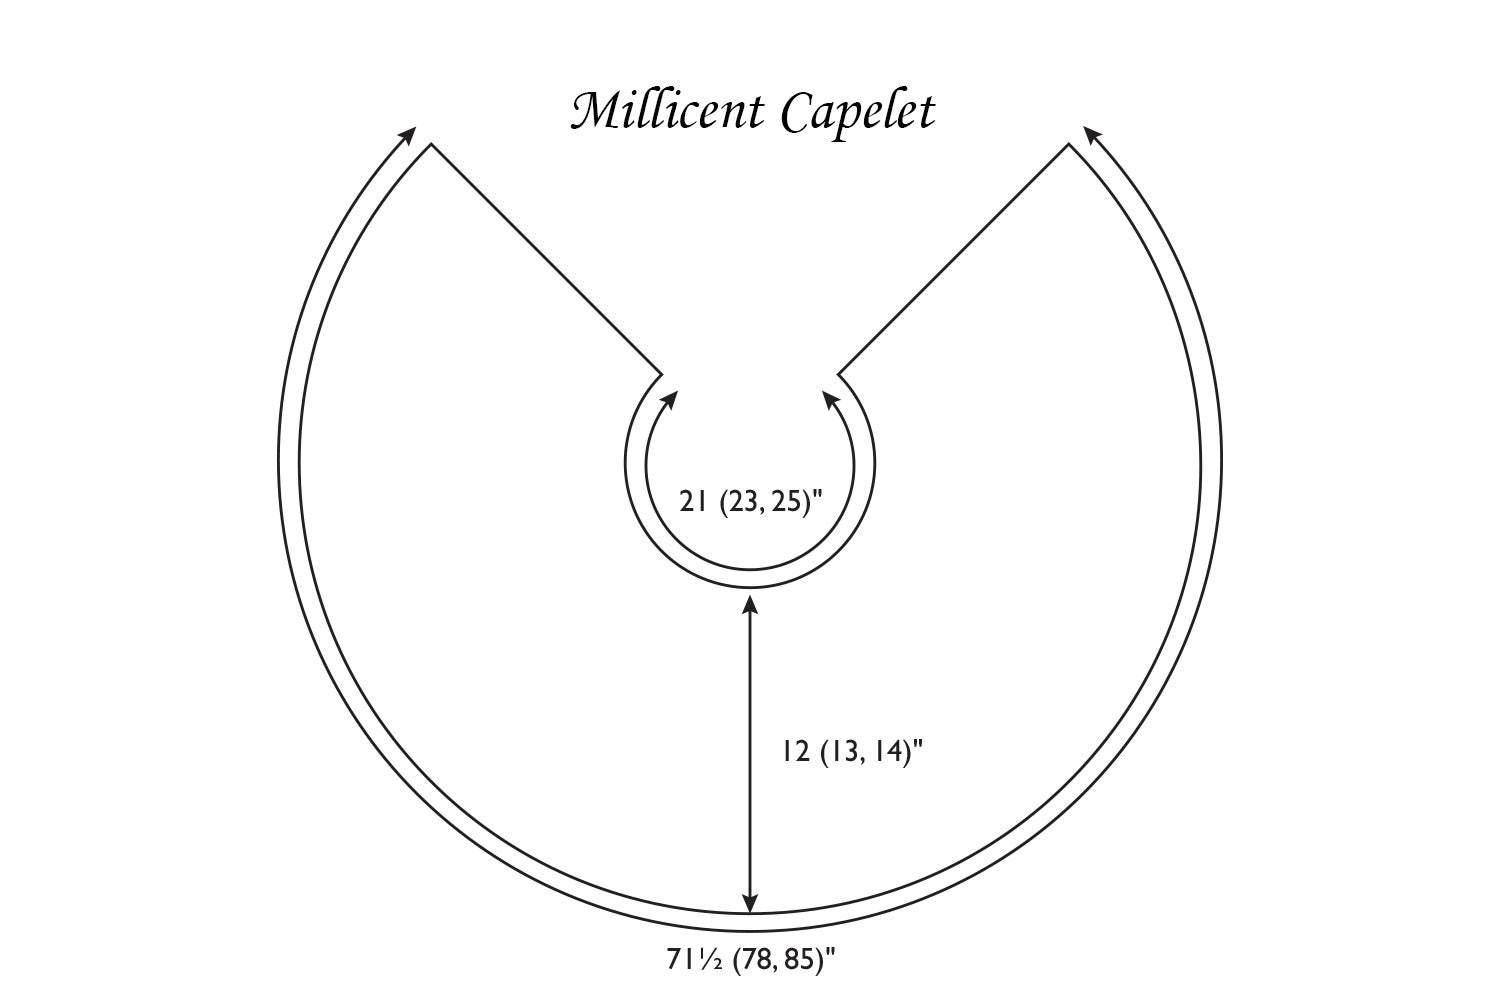 Schematic line drawing for capelet with dimensions